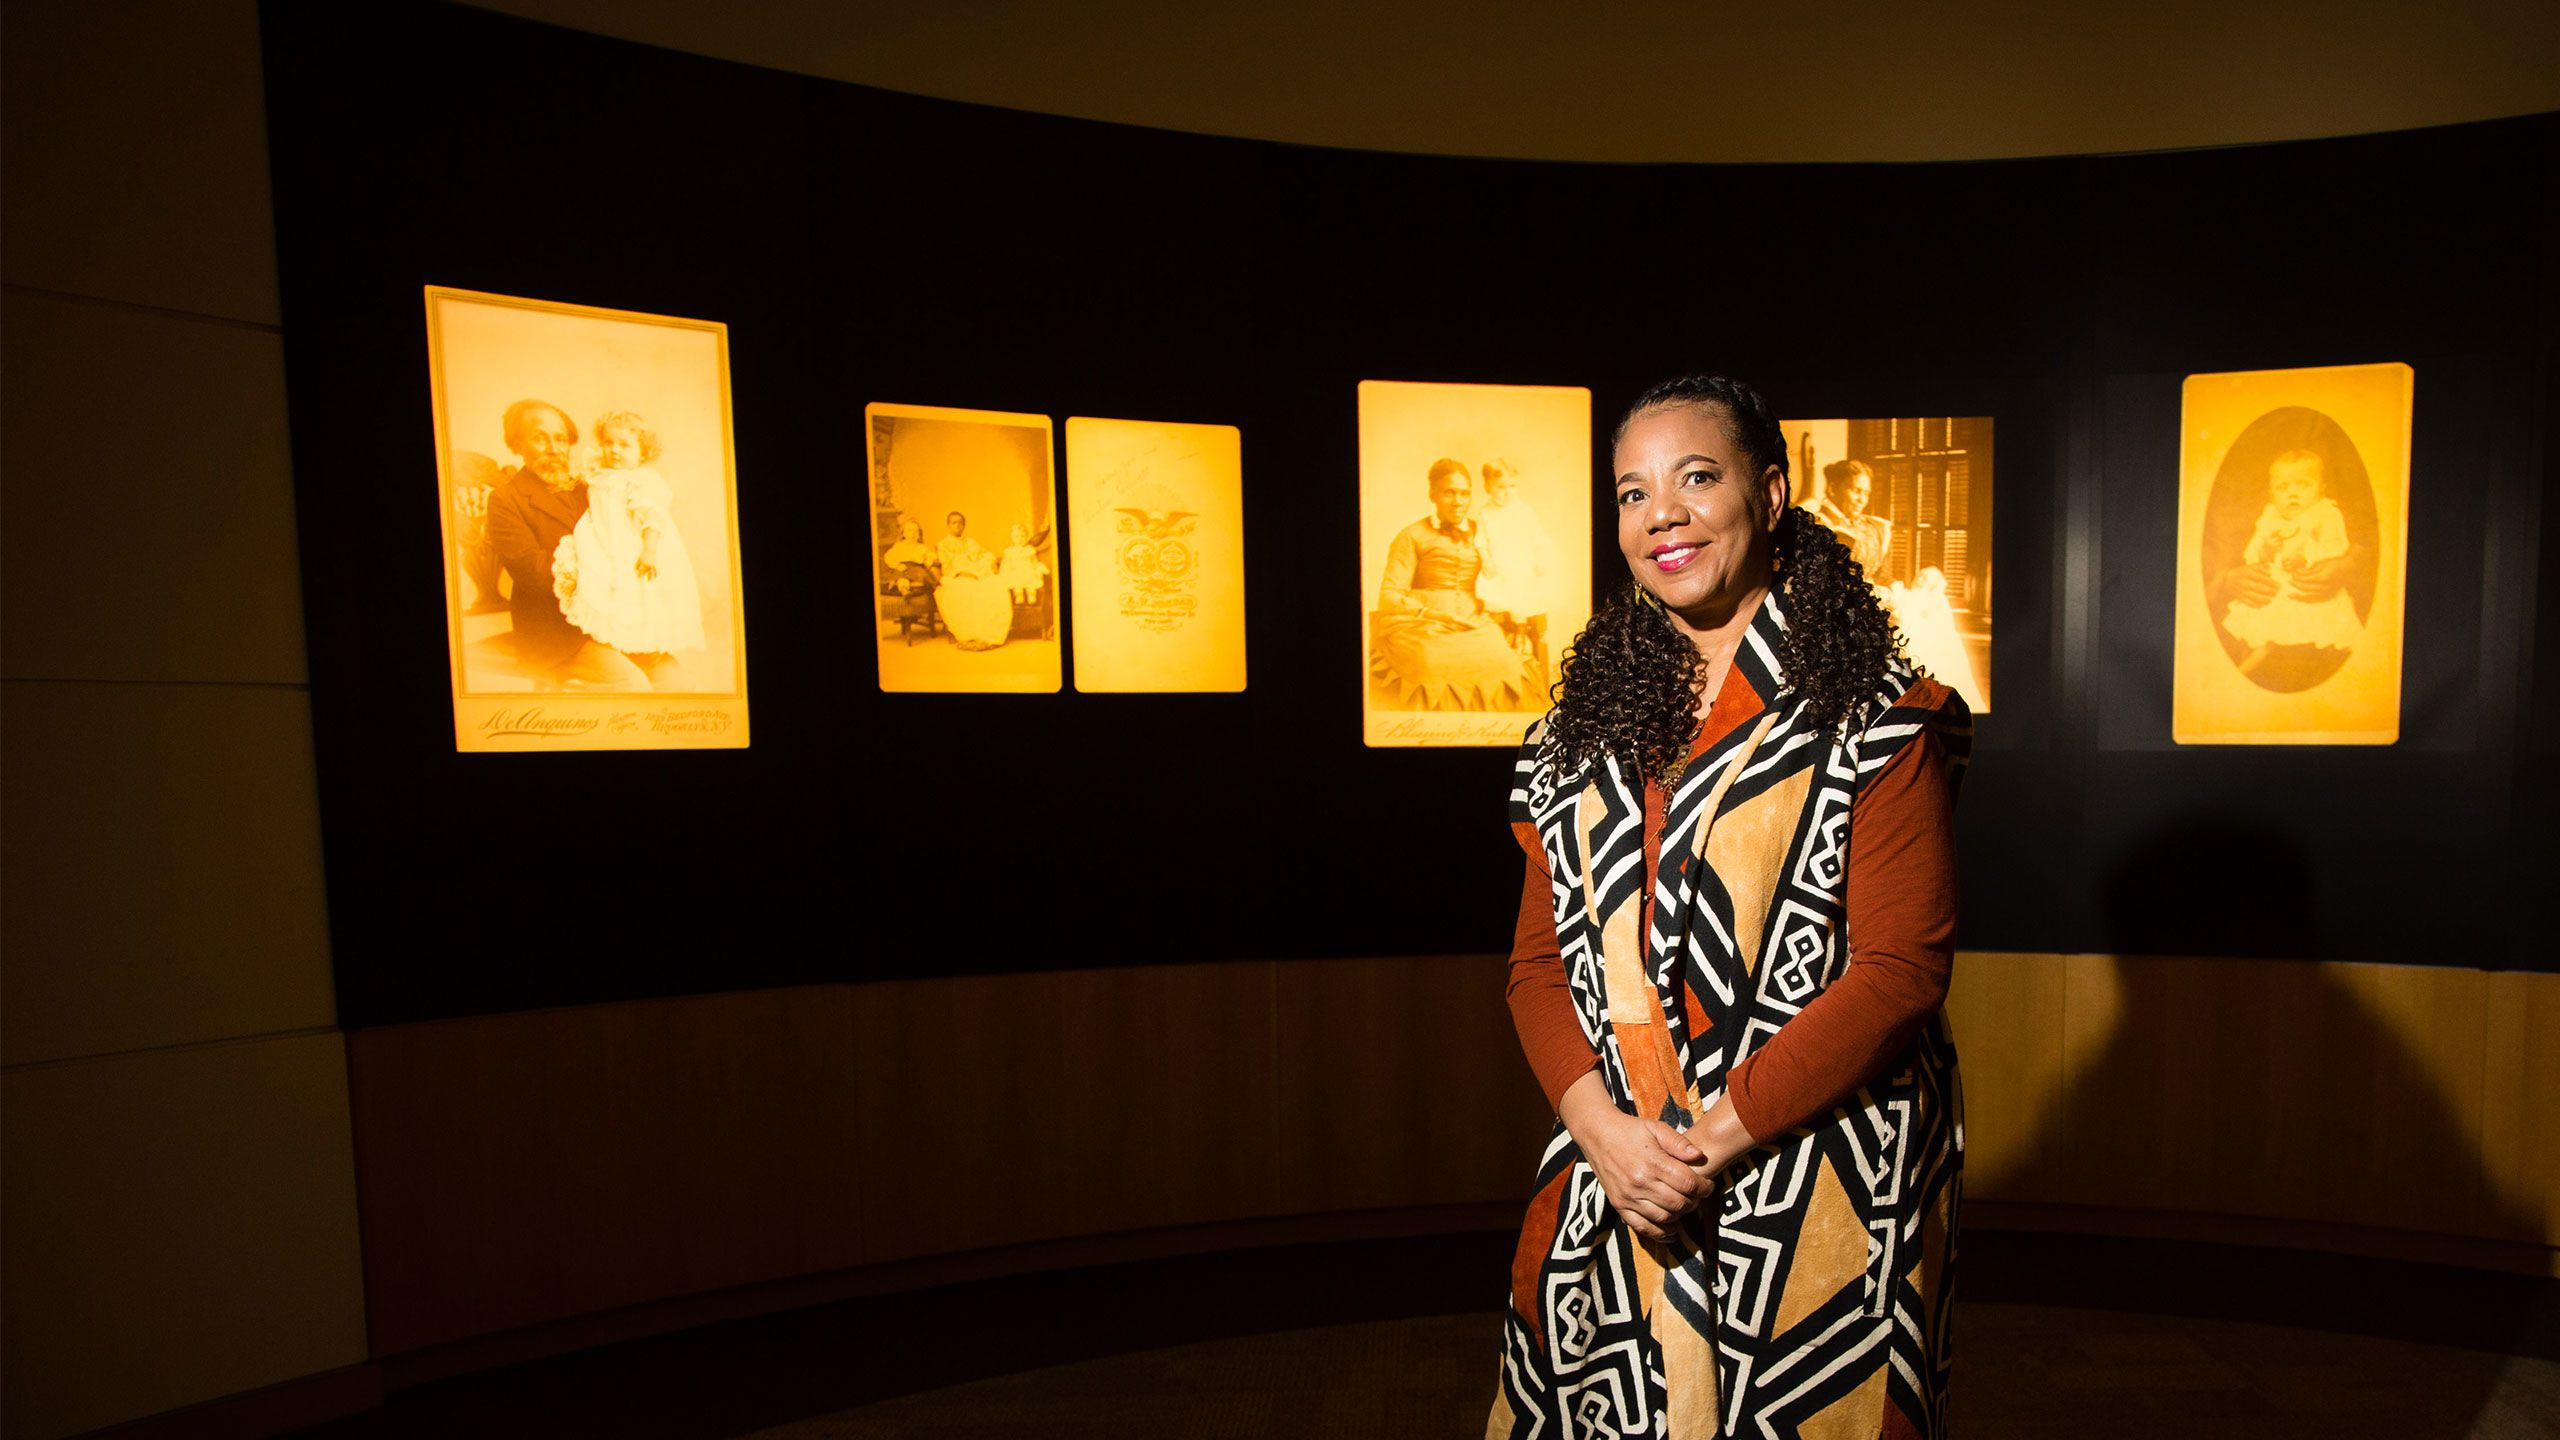 Emory professor Kimberly Wallace-Sanders stands in front of the Framing Shadows exhibit in Woodruff library. A series of sepia-toned historical photos show African American women holding white children.